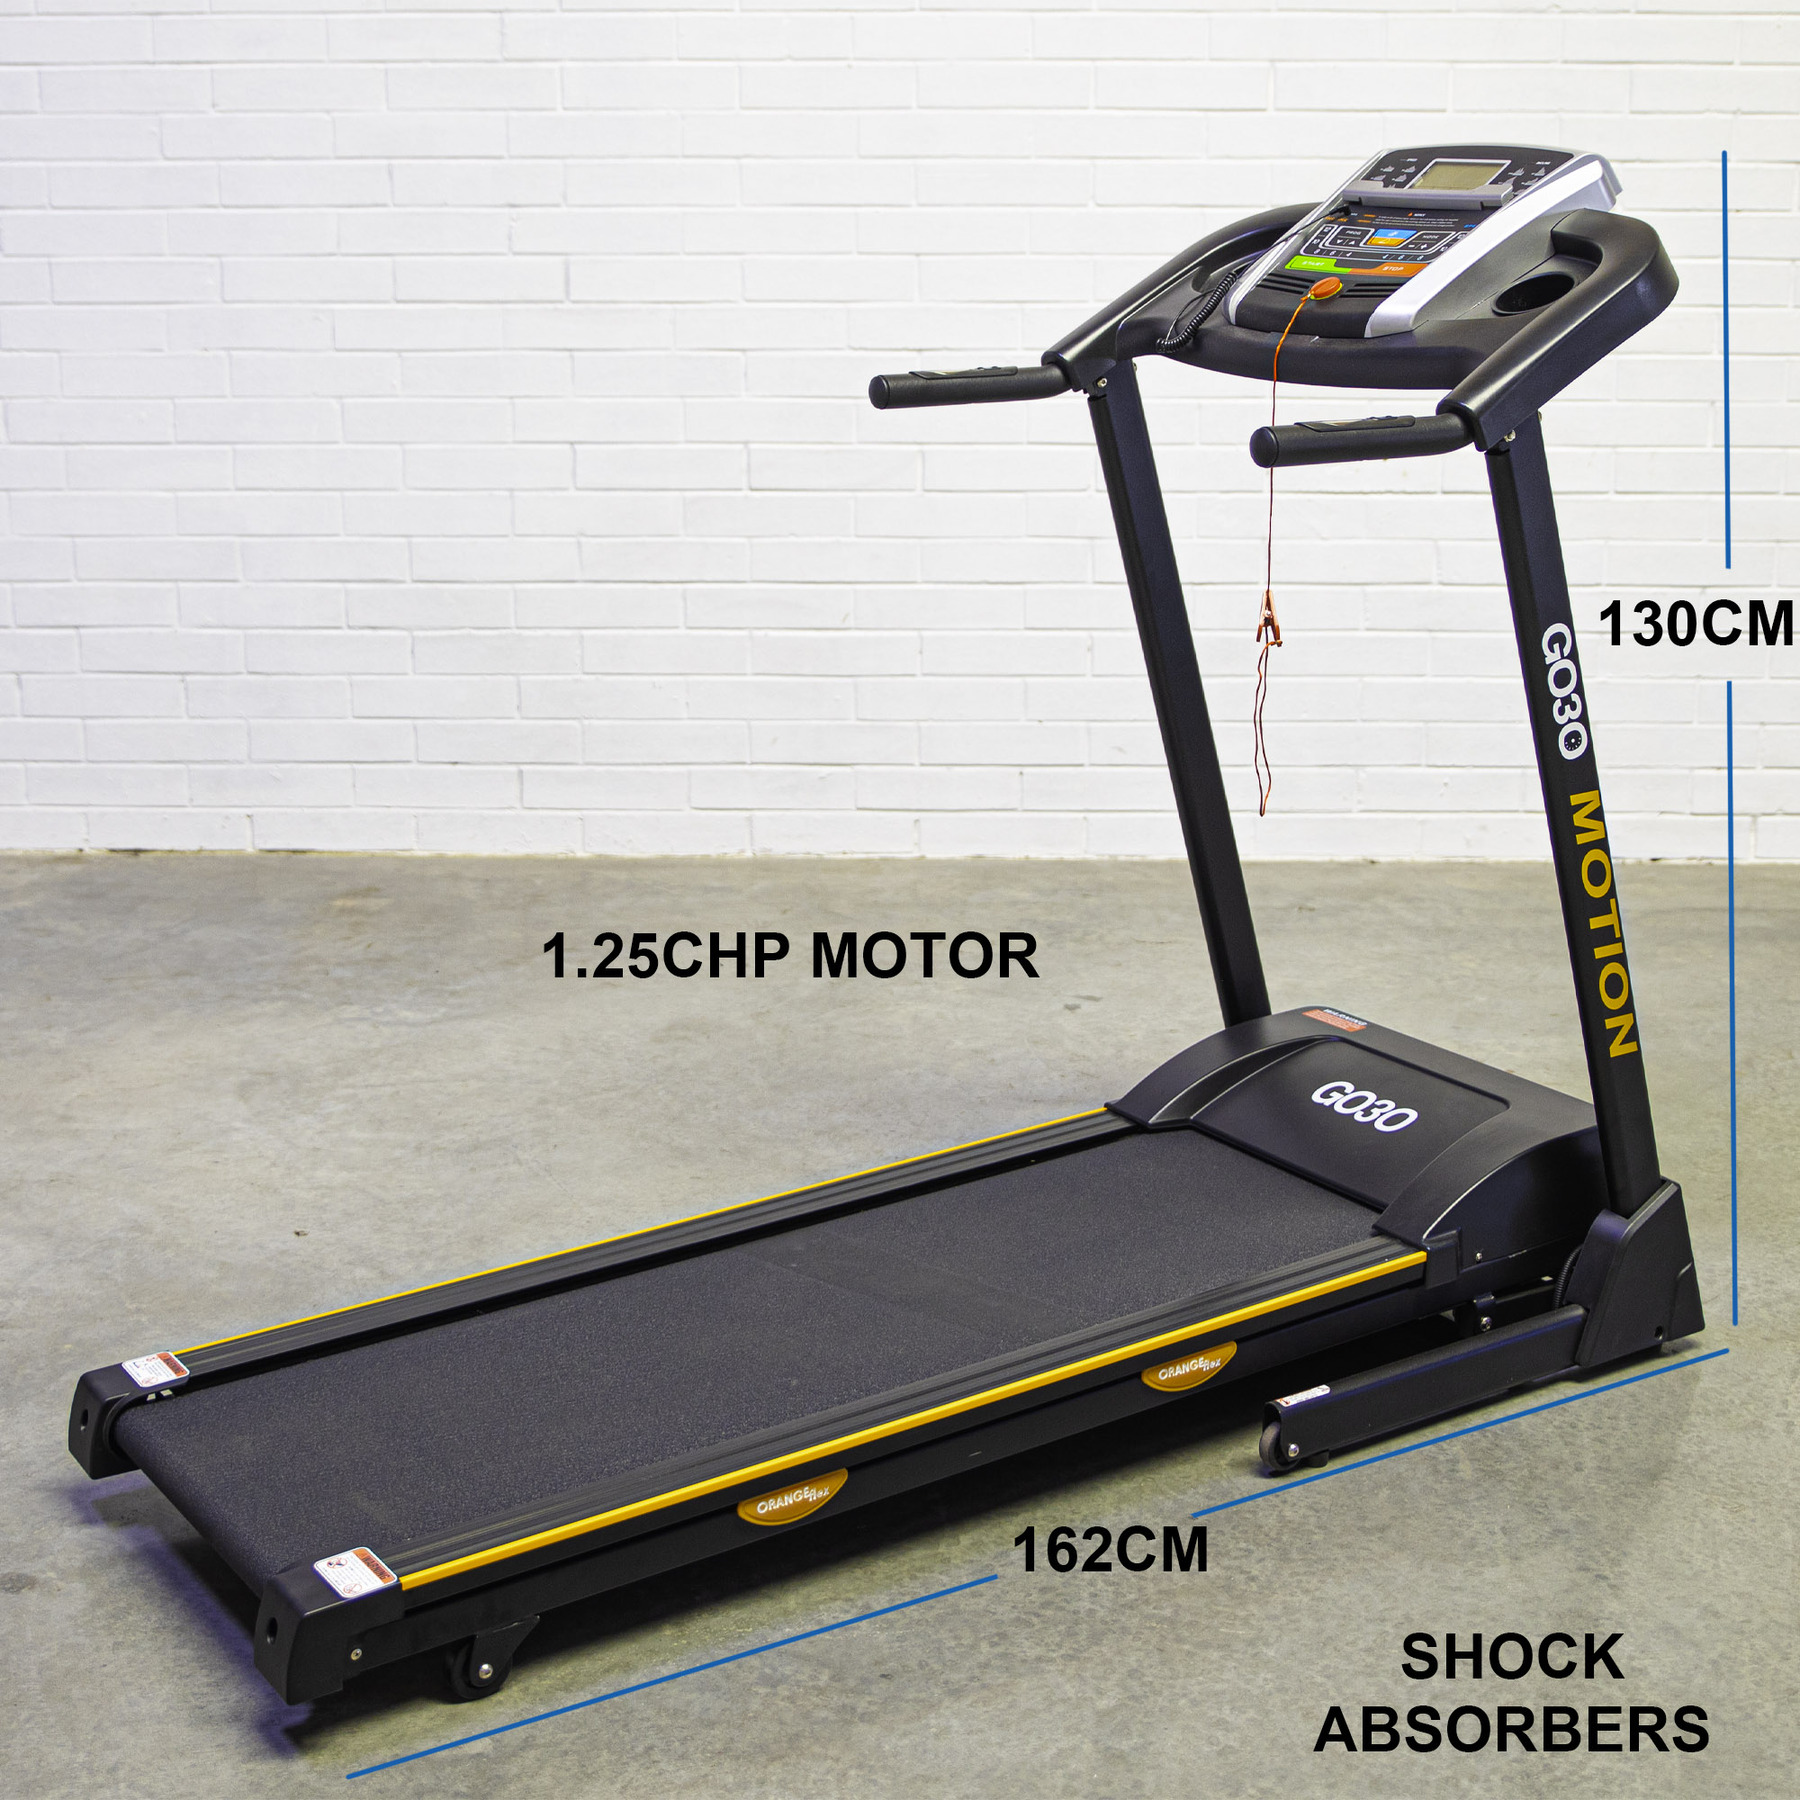 Go30 Small Motorized Treadmill that Inclines - MOTION200